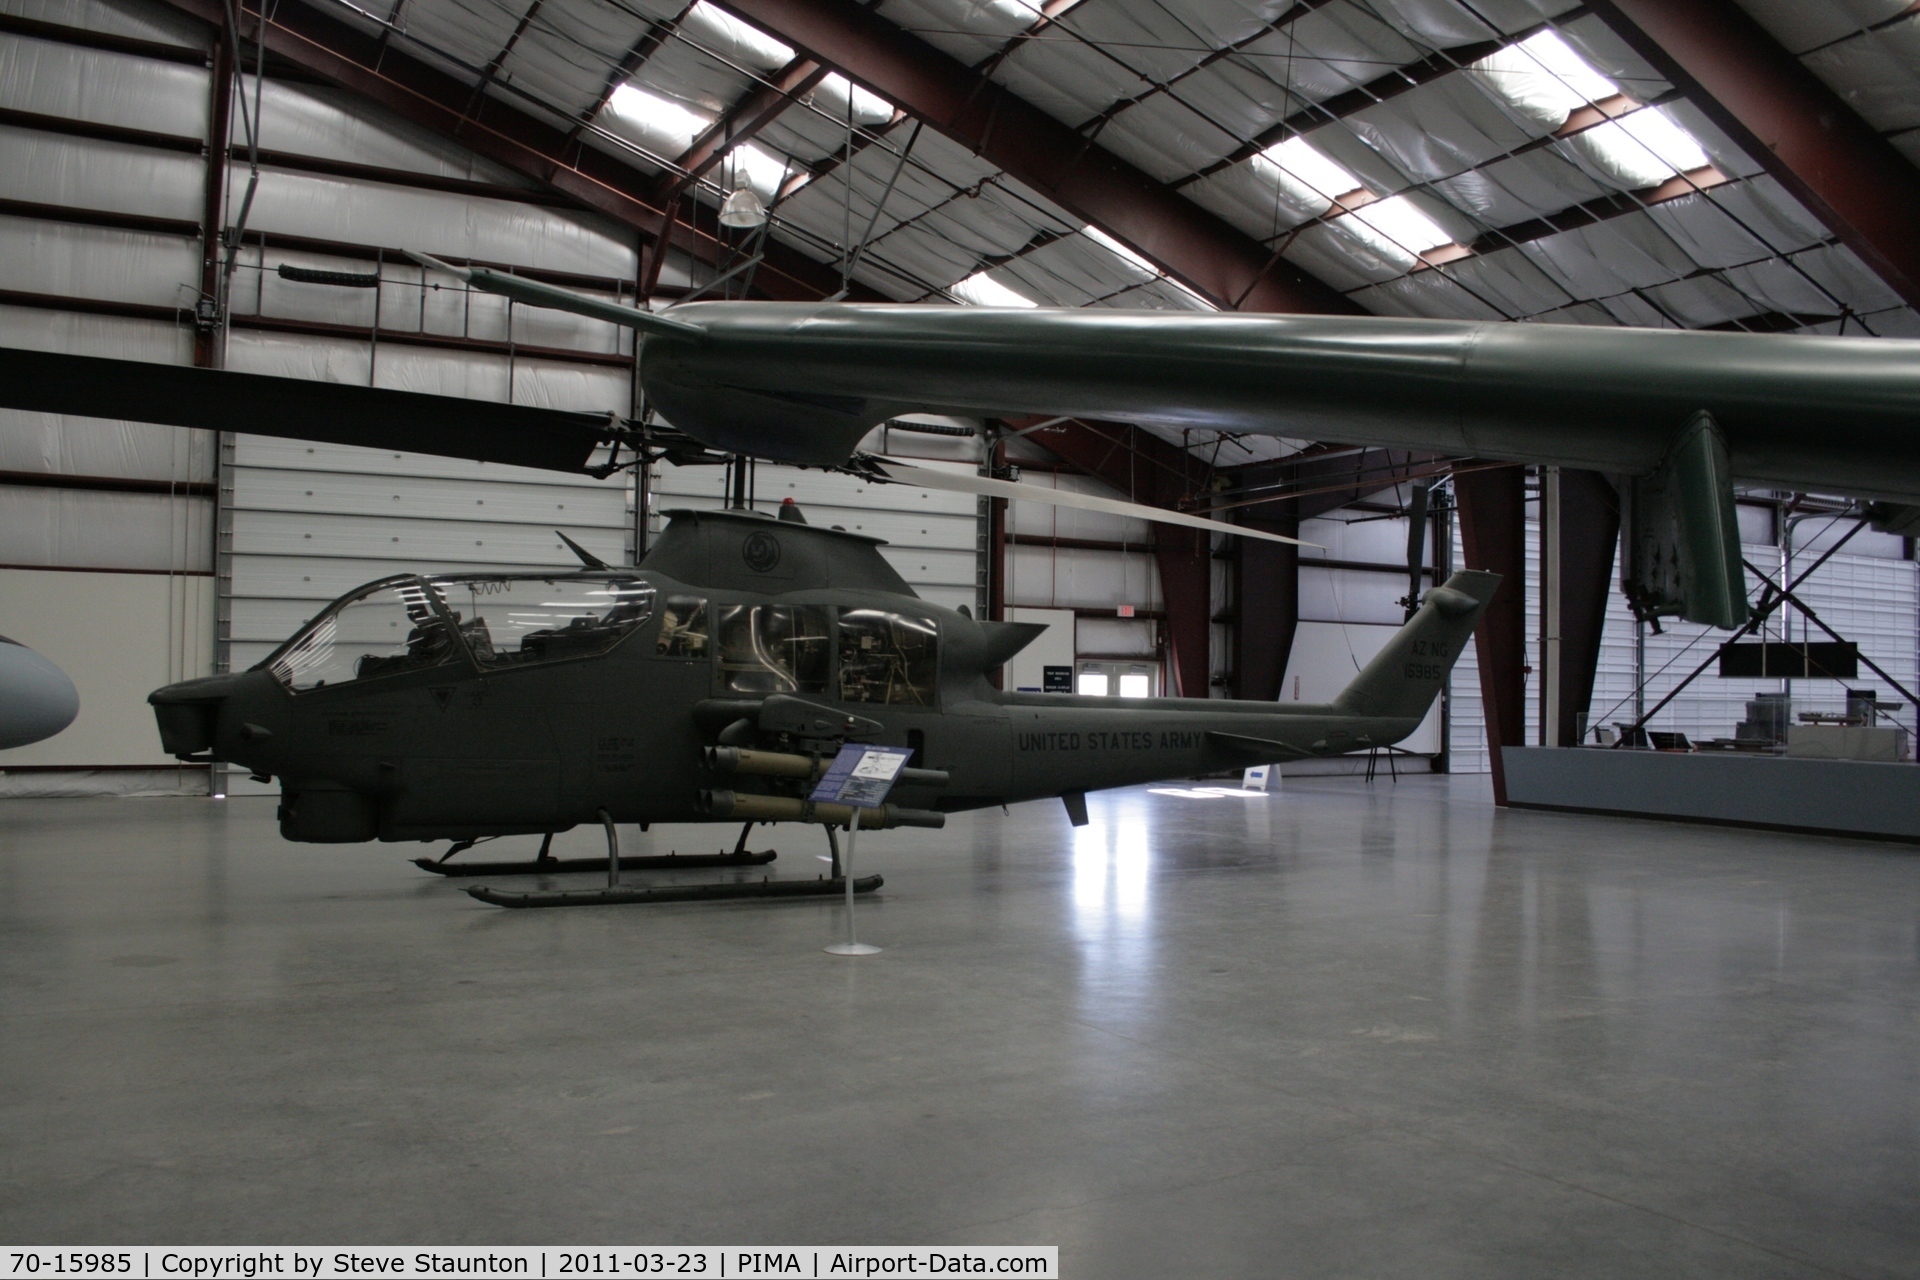 70-15985, Bell AH-1S Cobra C/N 20929, Taken at Pima Air and Space Museum, in March 2011 whilst on an Aeroprint Aviation tour